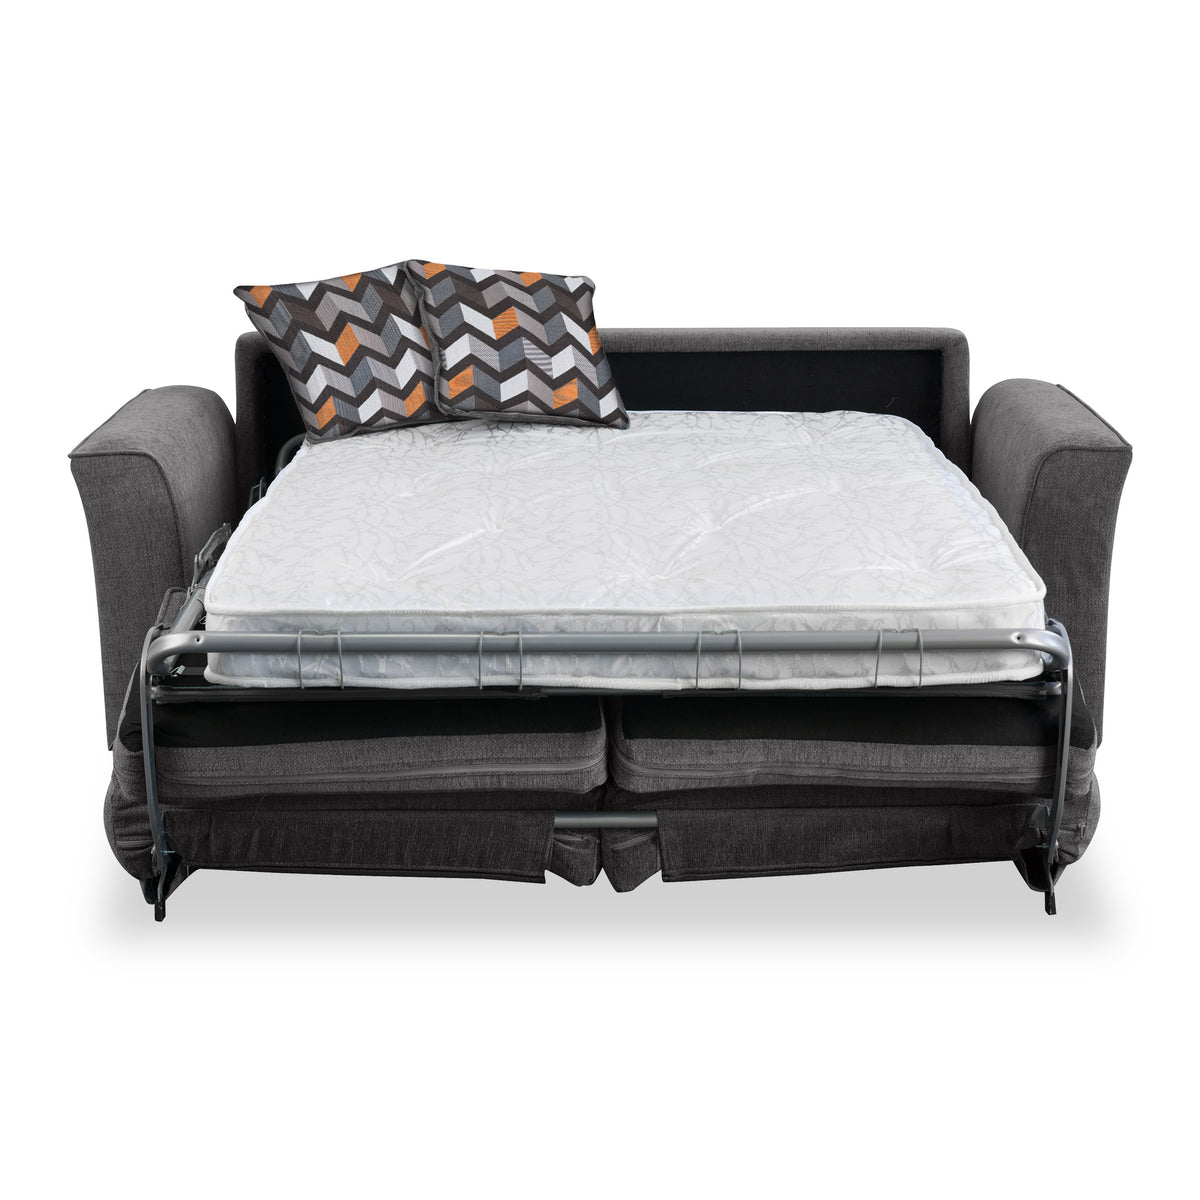 Boston 2 Seater Sofabed in Charcoal with Morelisa Charcoal Cushions by Roseland Furniture